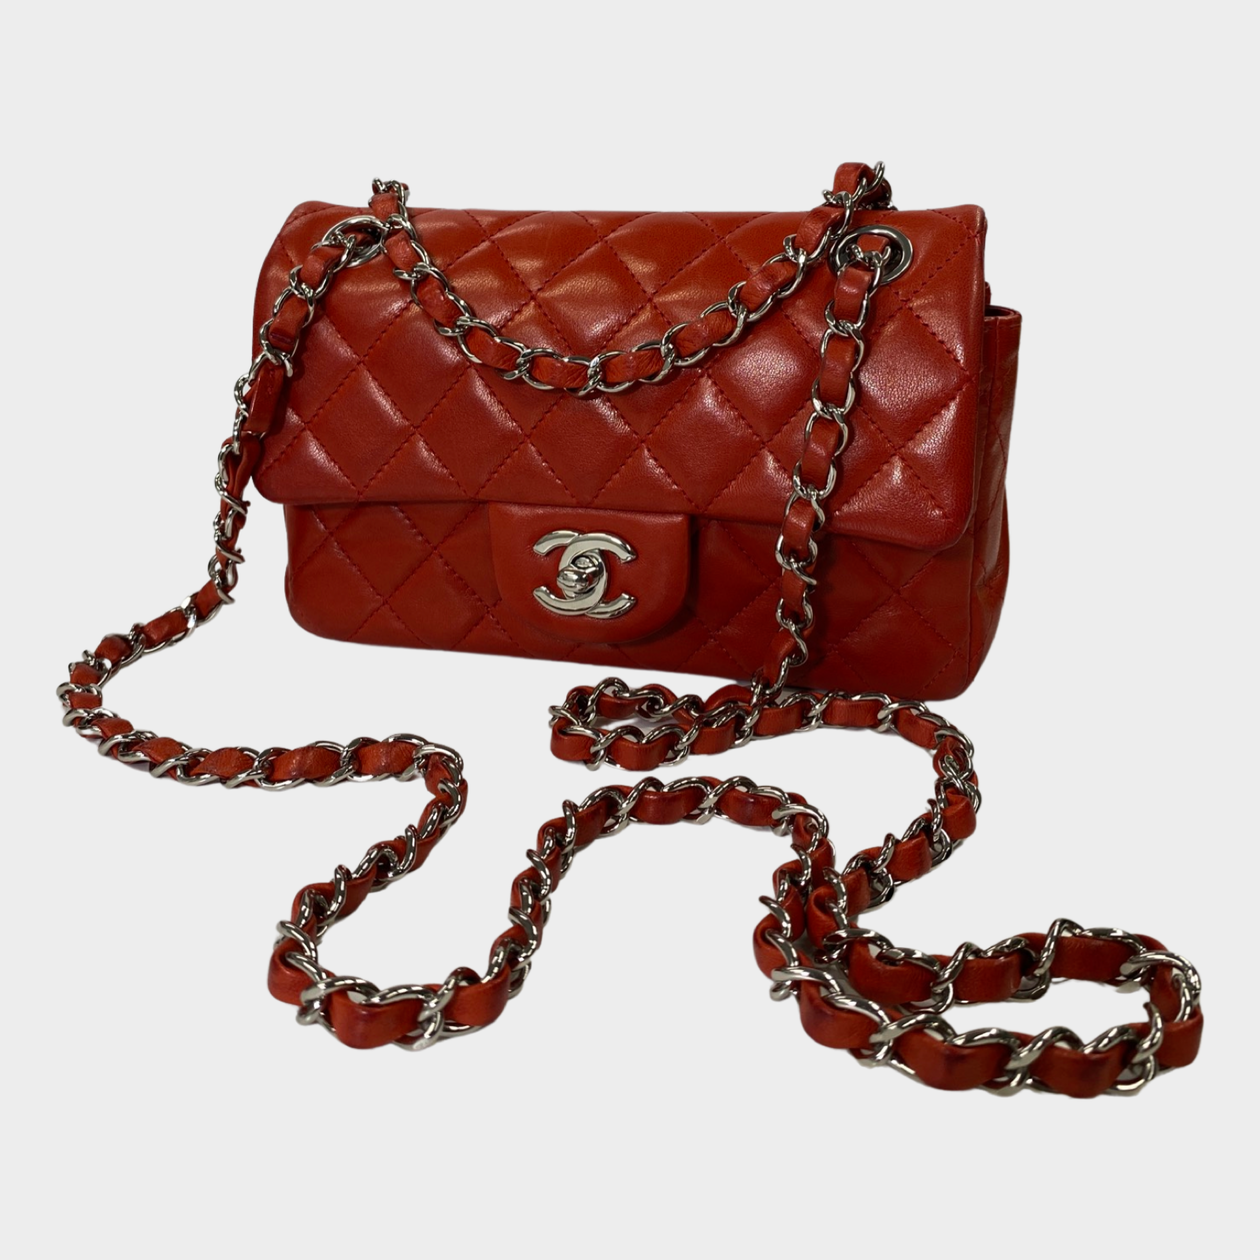 red and white chanel bag vintage